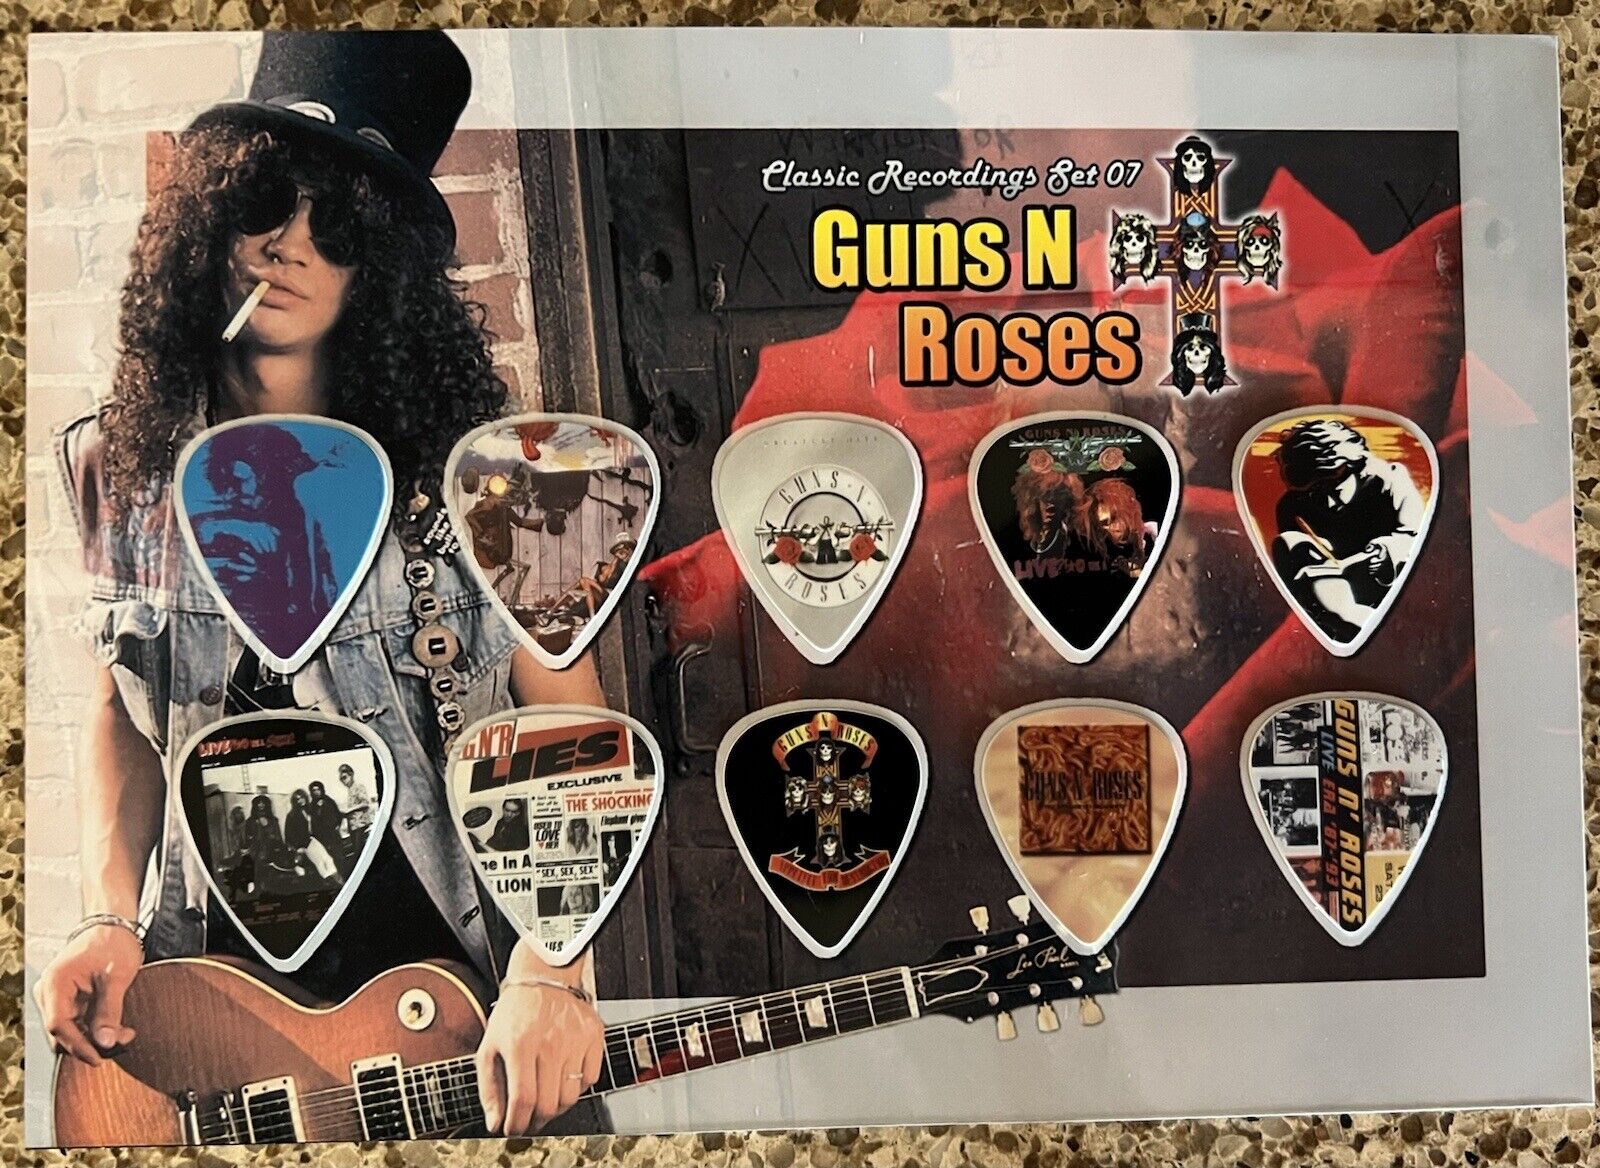 Guns & Roses Limited Edition Classic 07 Recording Choice Pi Set lowest price Guitar